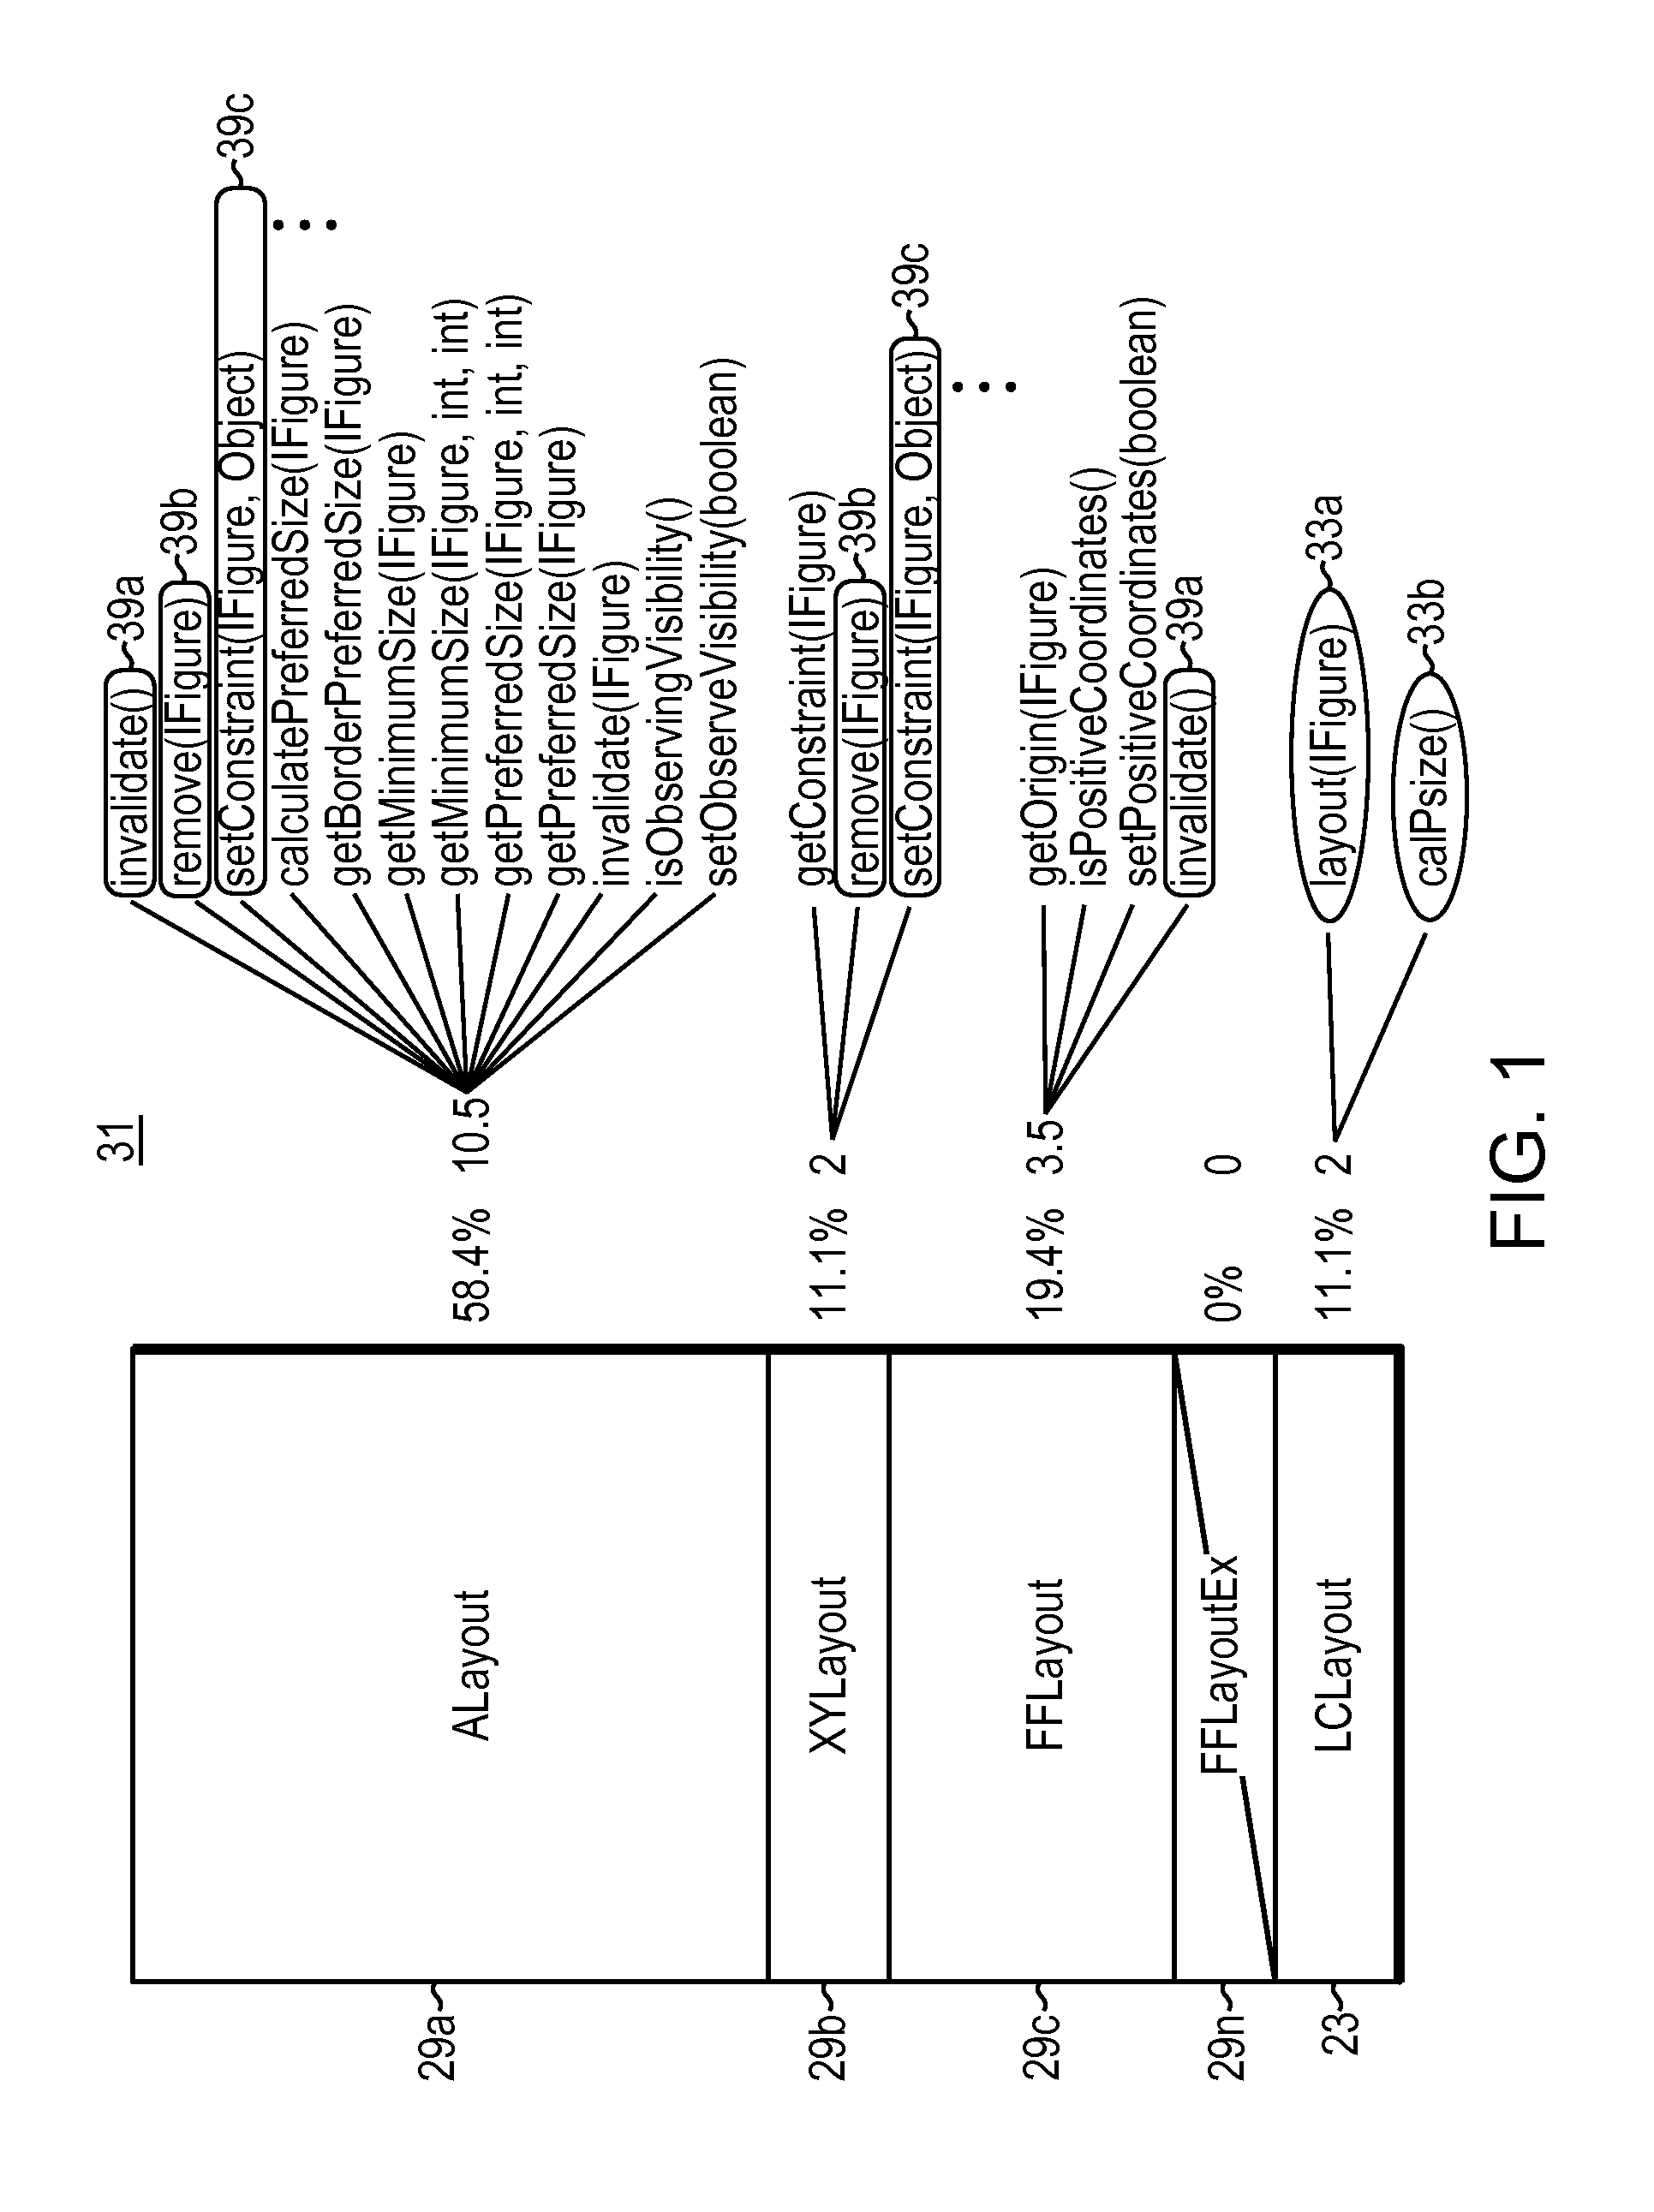 Hierarchical functional and variable composition diagramming of a programming class